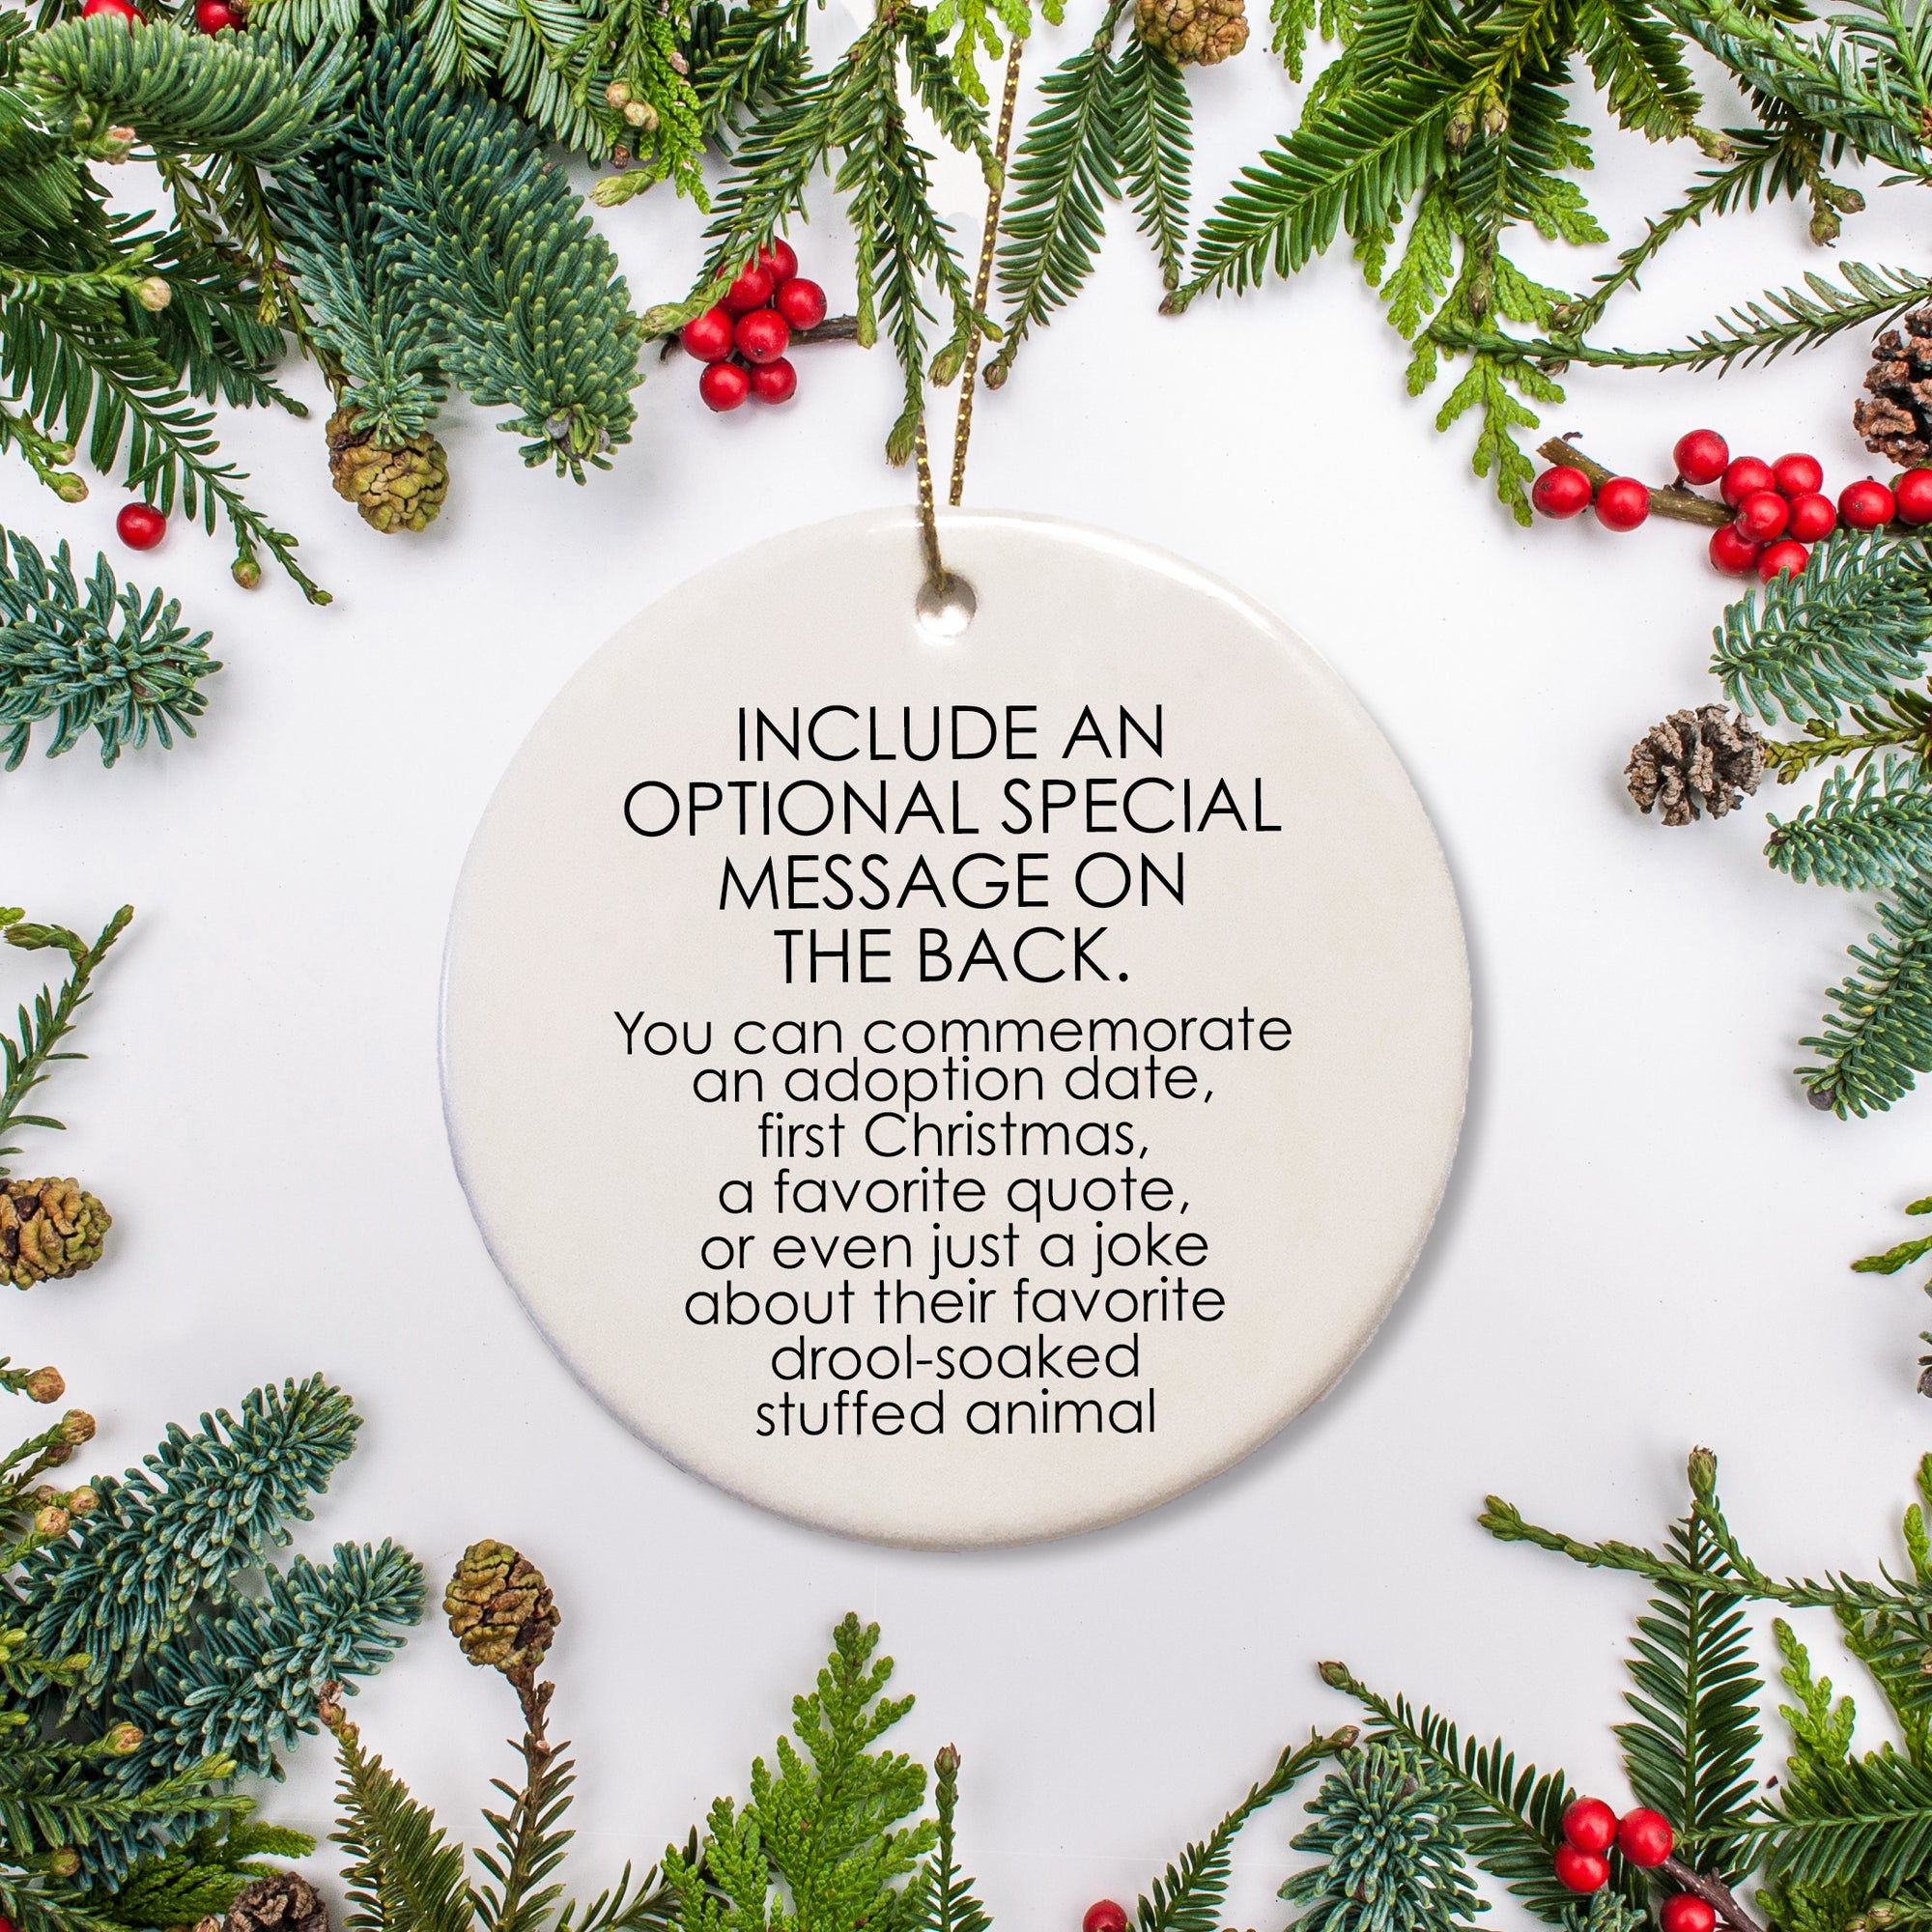 Personalized round ceramic holiday ornament, with a special, custom message printed on the back